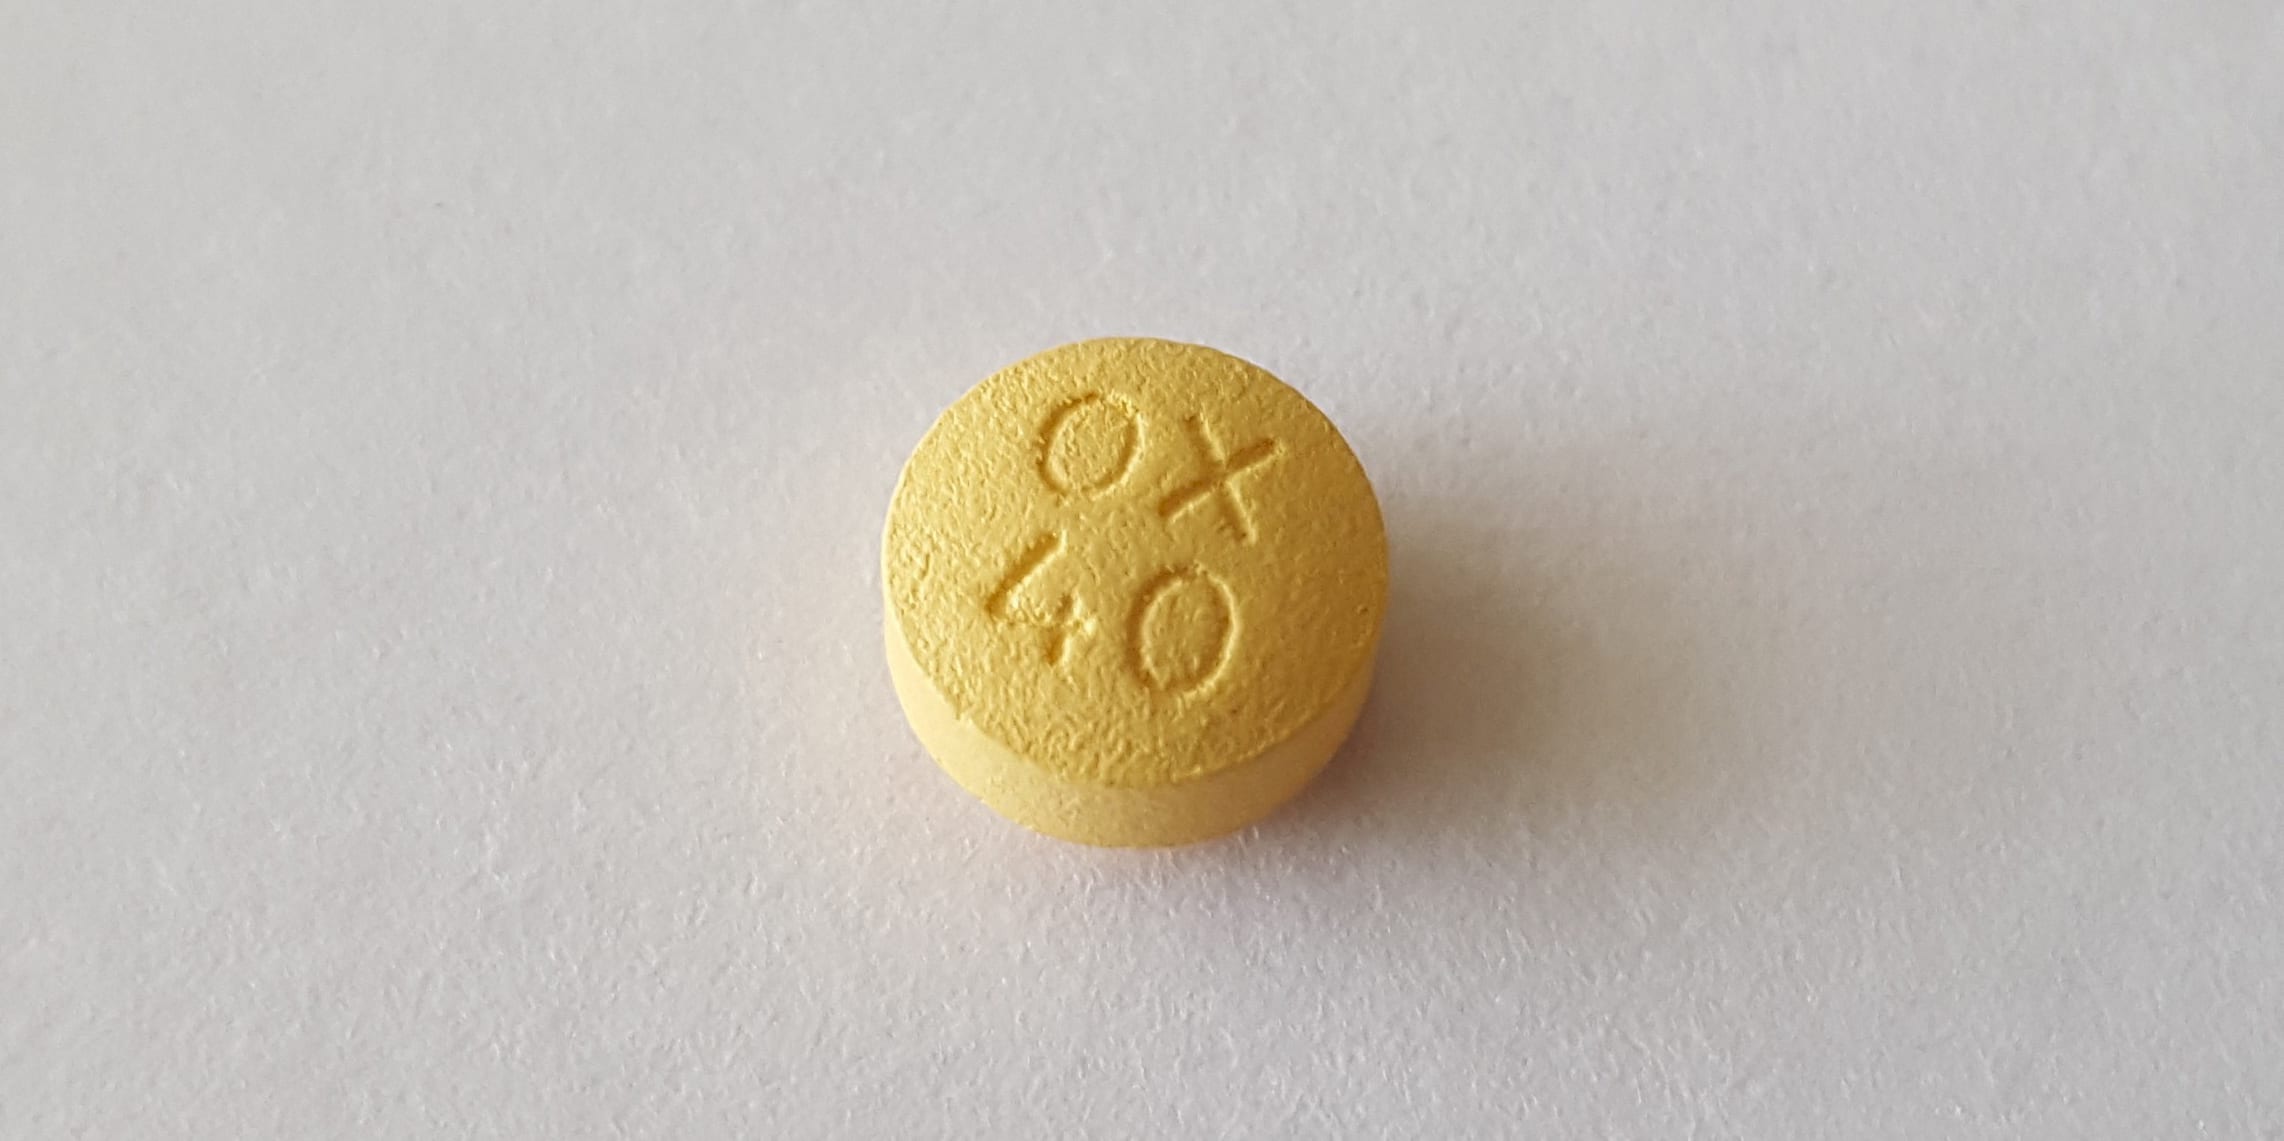 An oxycodone pill, which is an opioid painkiller. Photo by Dominic Milton Trott.